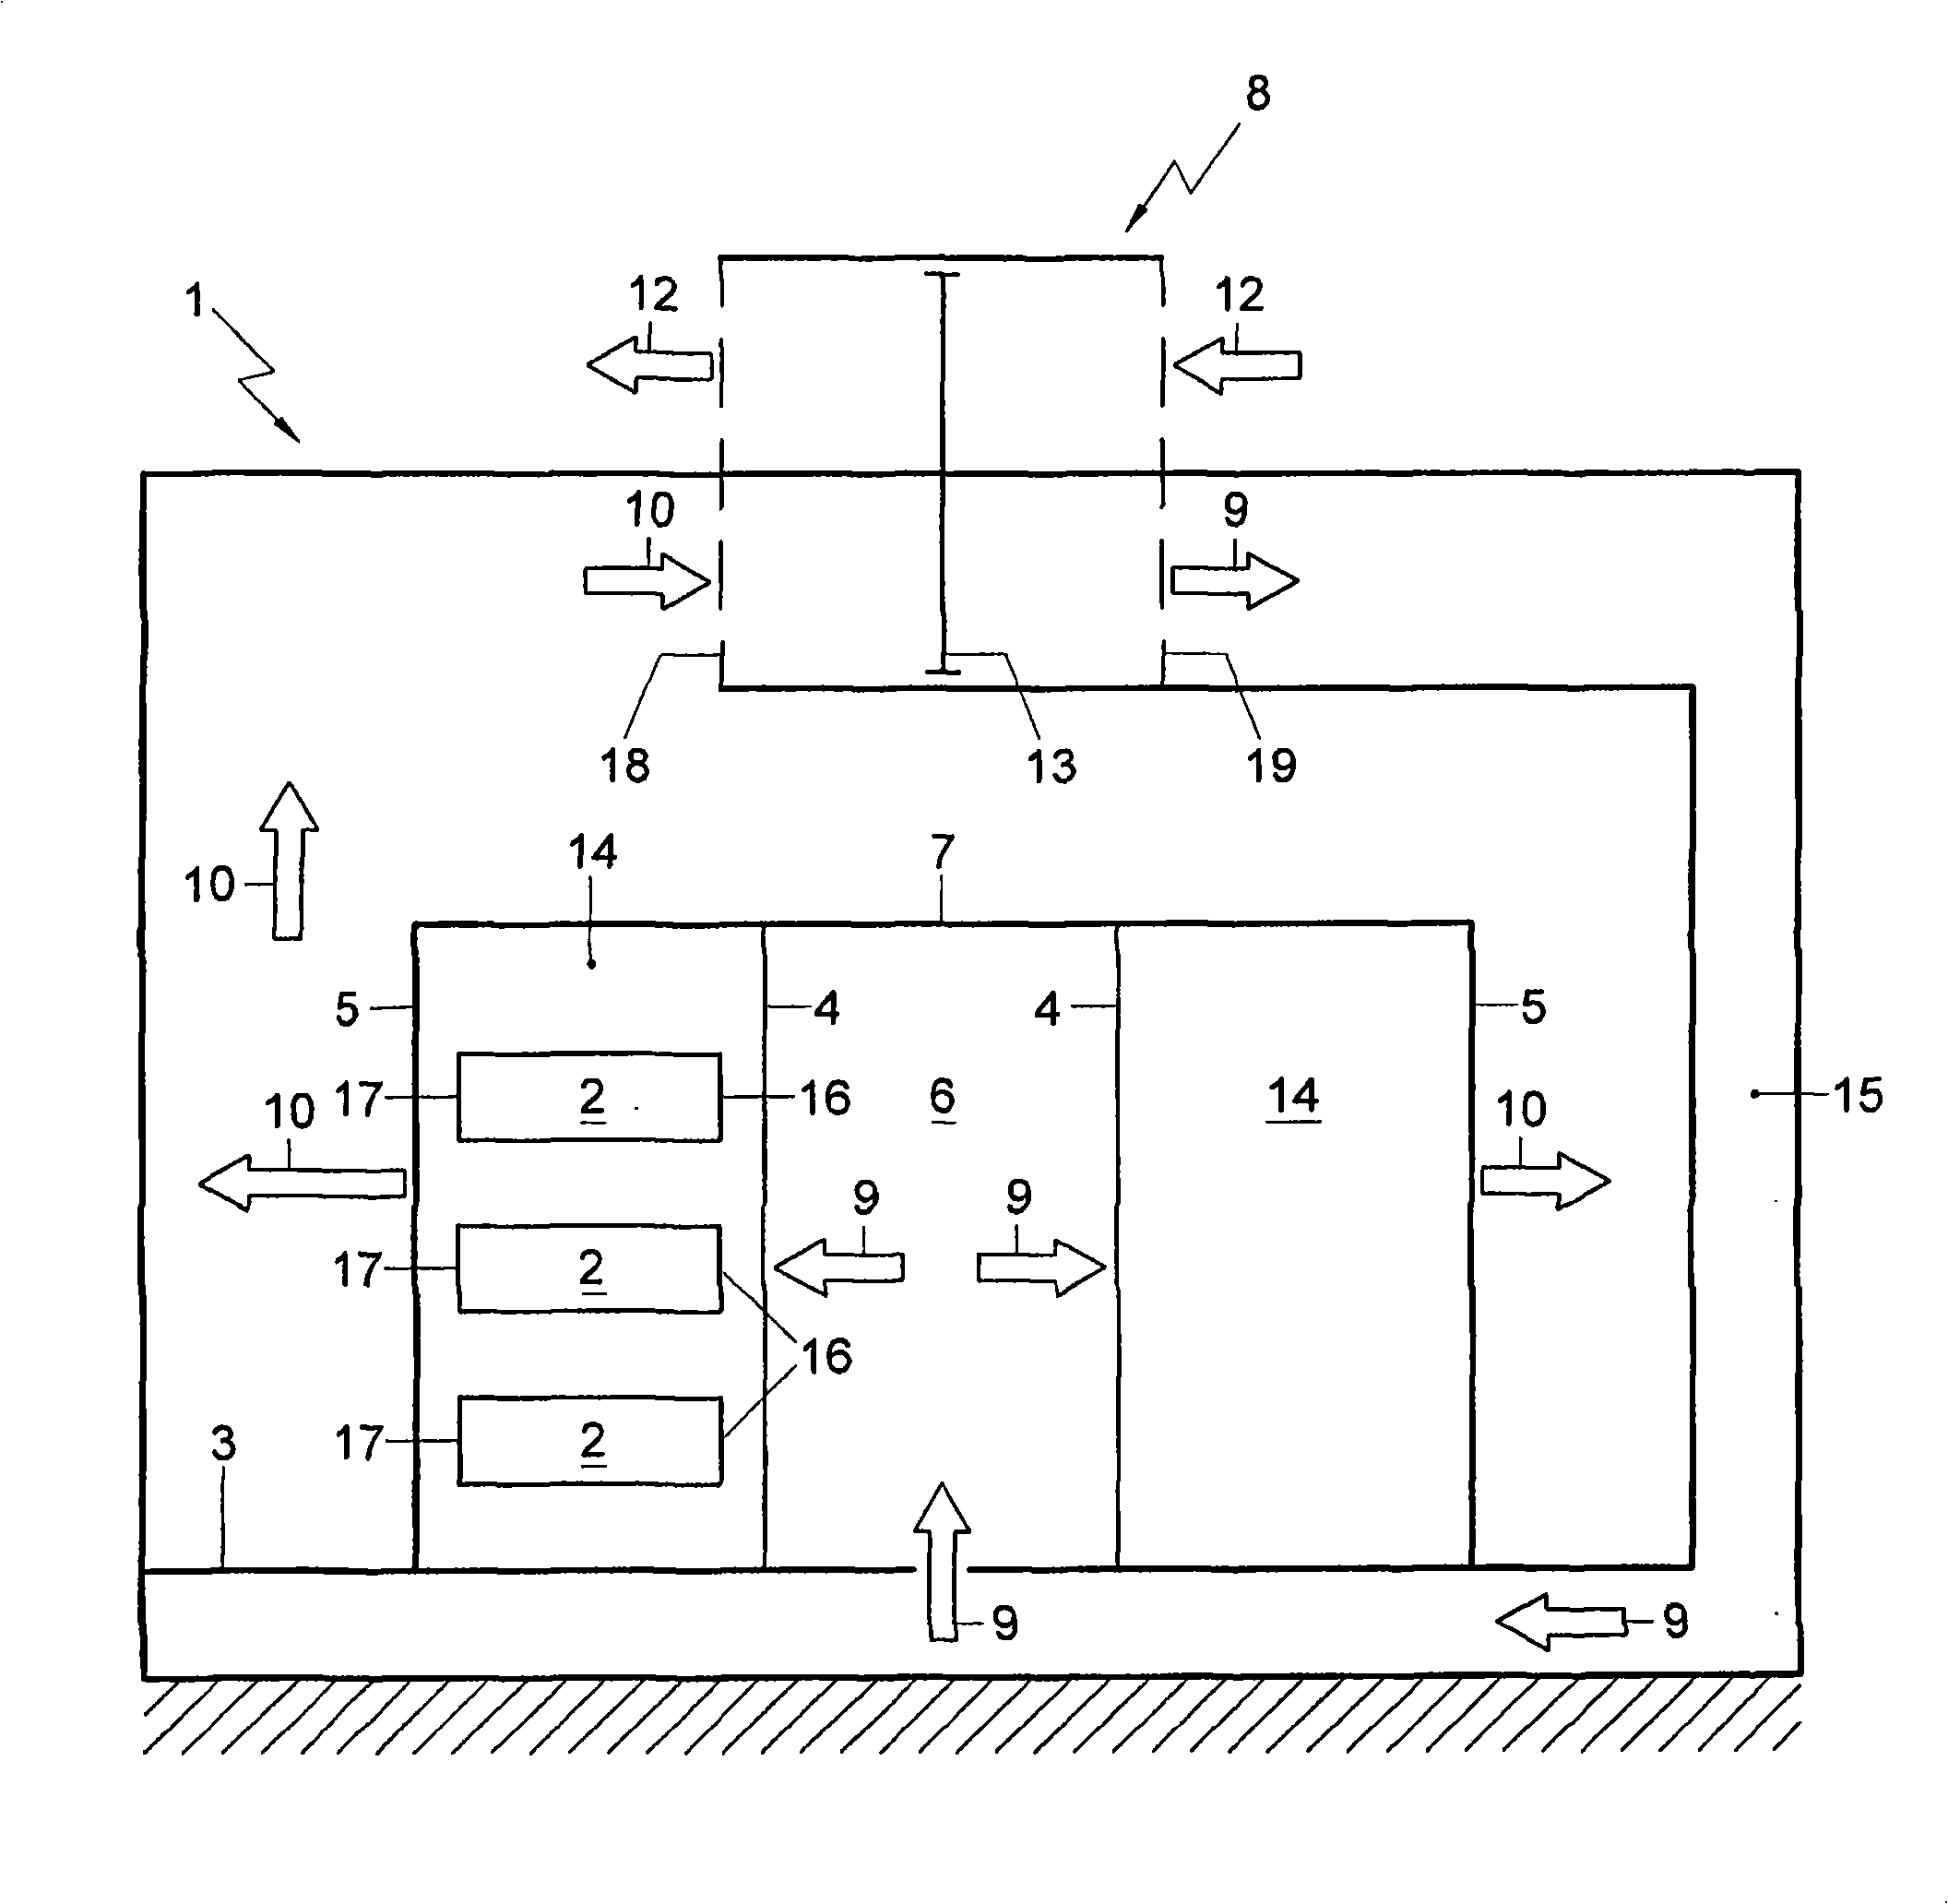 Apparatus and method for cooling a space in a data center by means of recirculation air